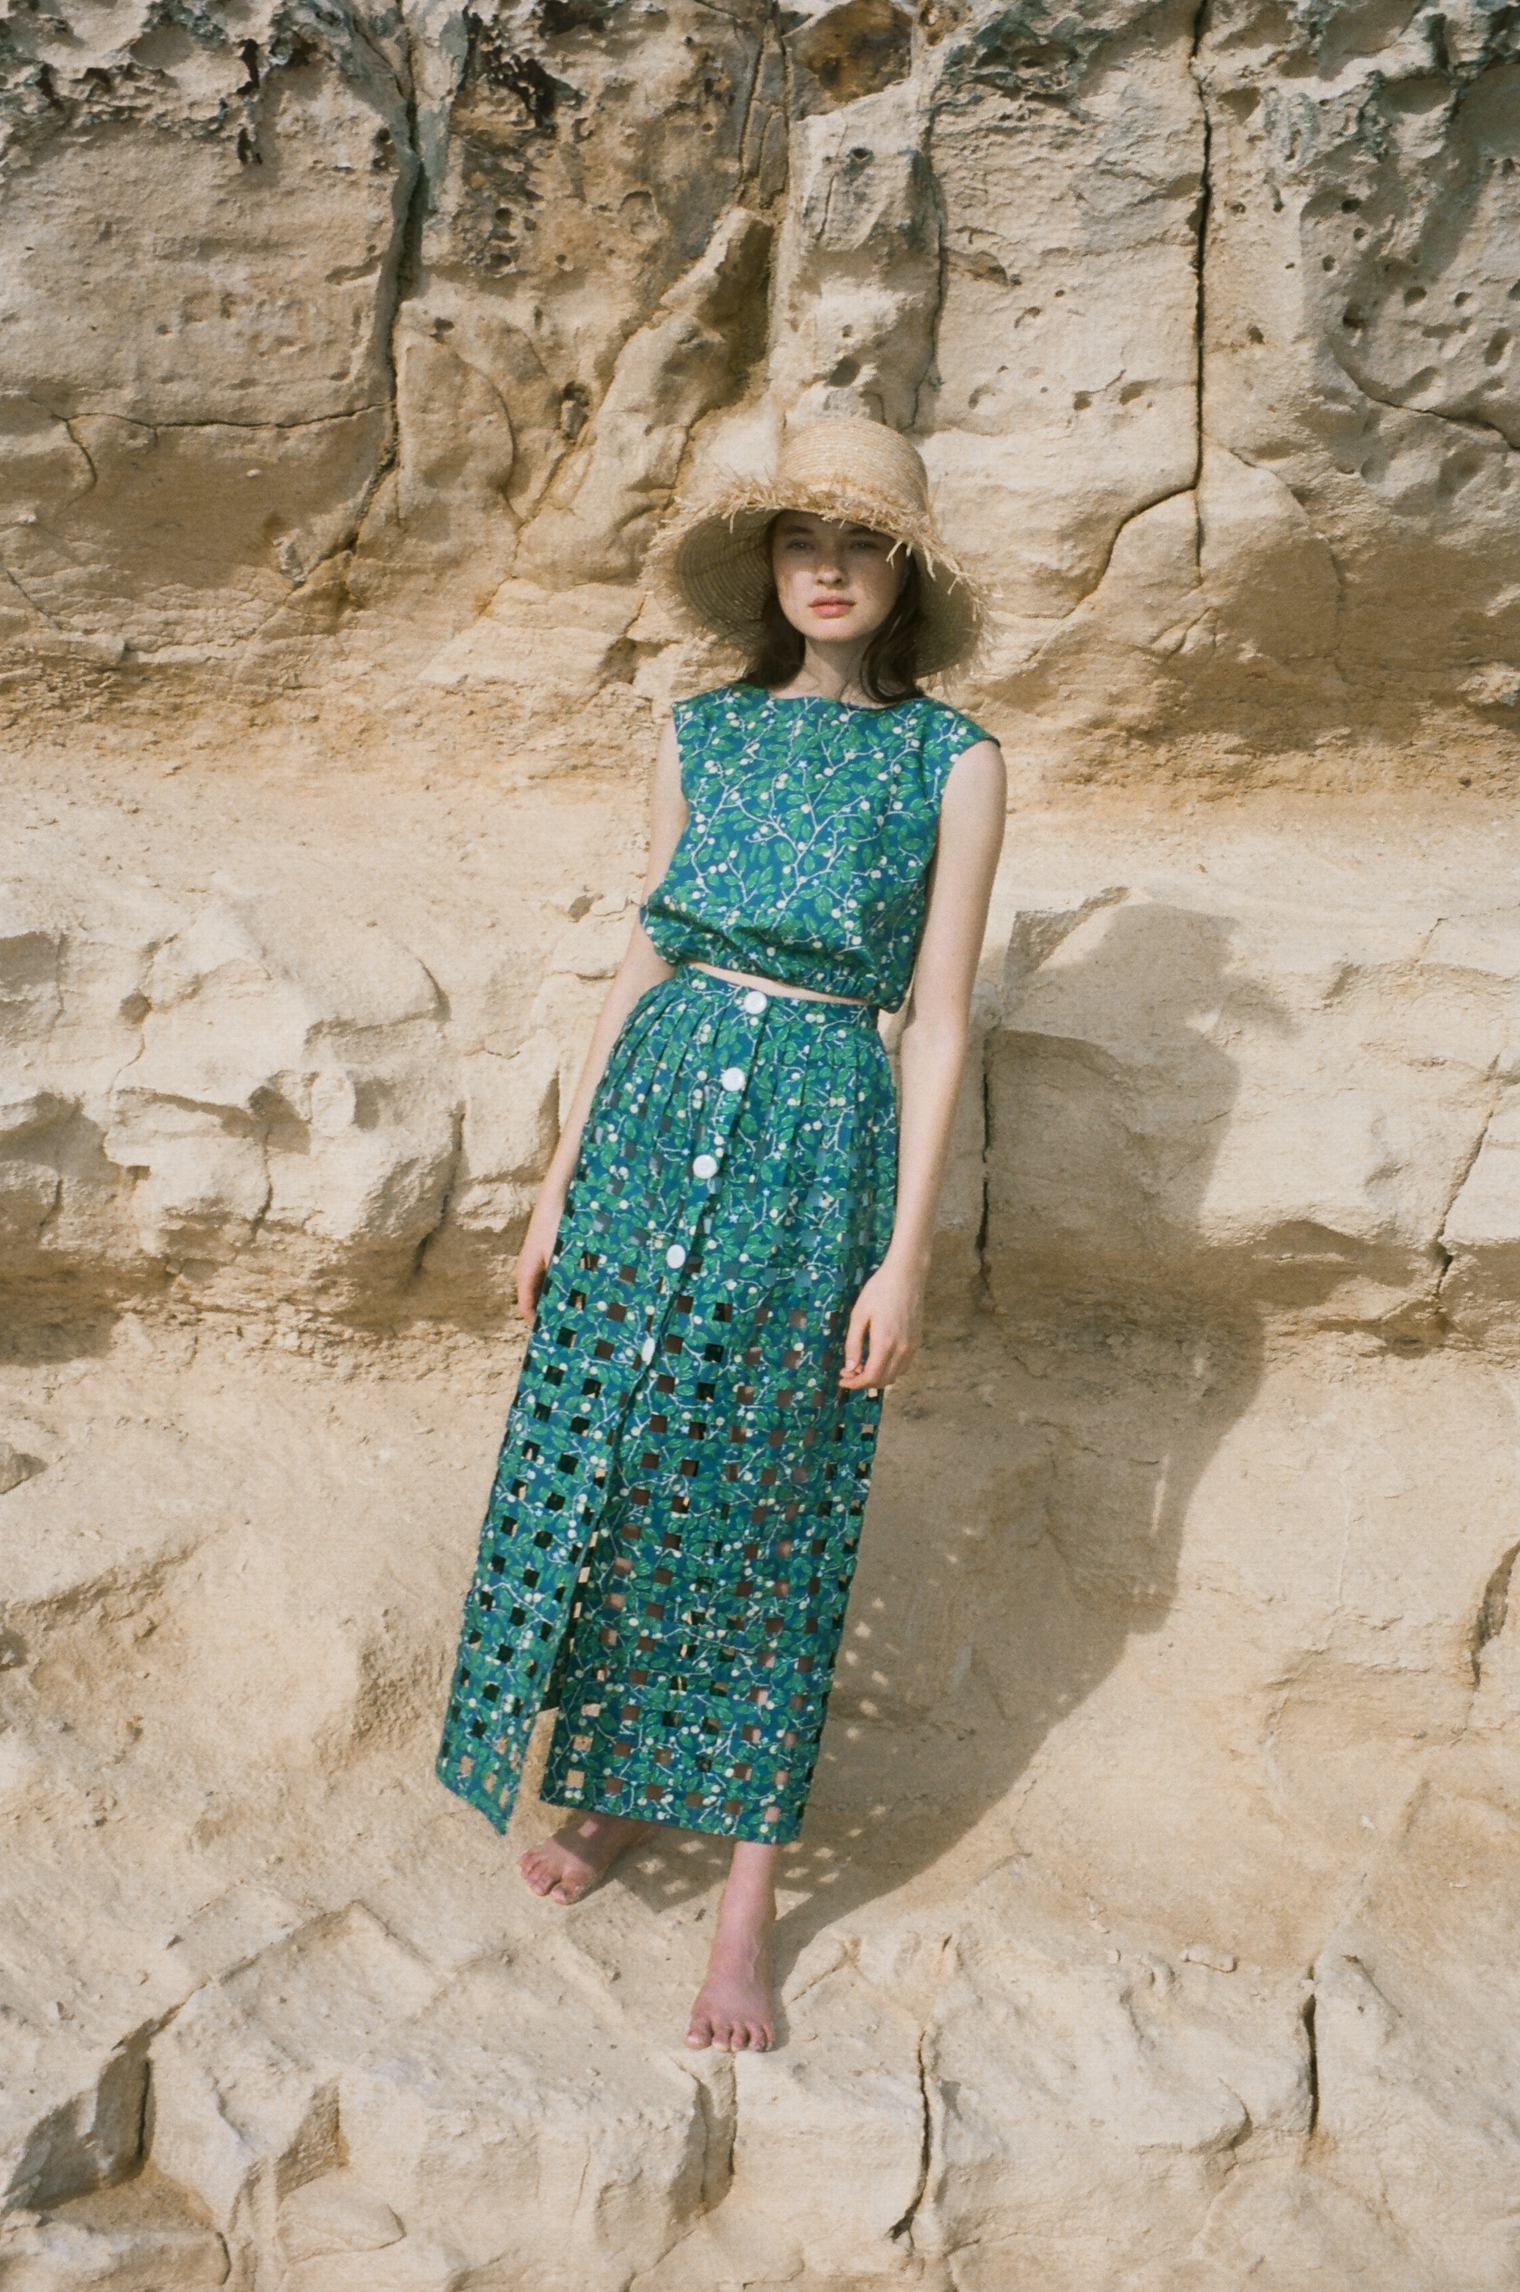 Meet The Resort Dress Brand Coco Shop, Your New Go-To For Dreamy ...